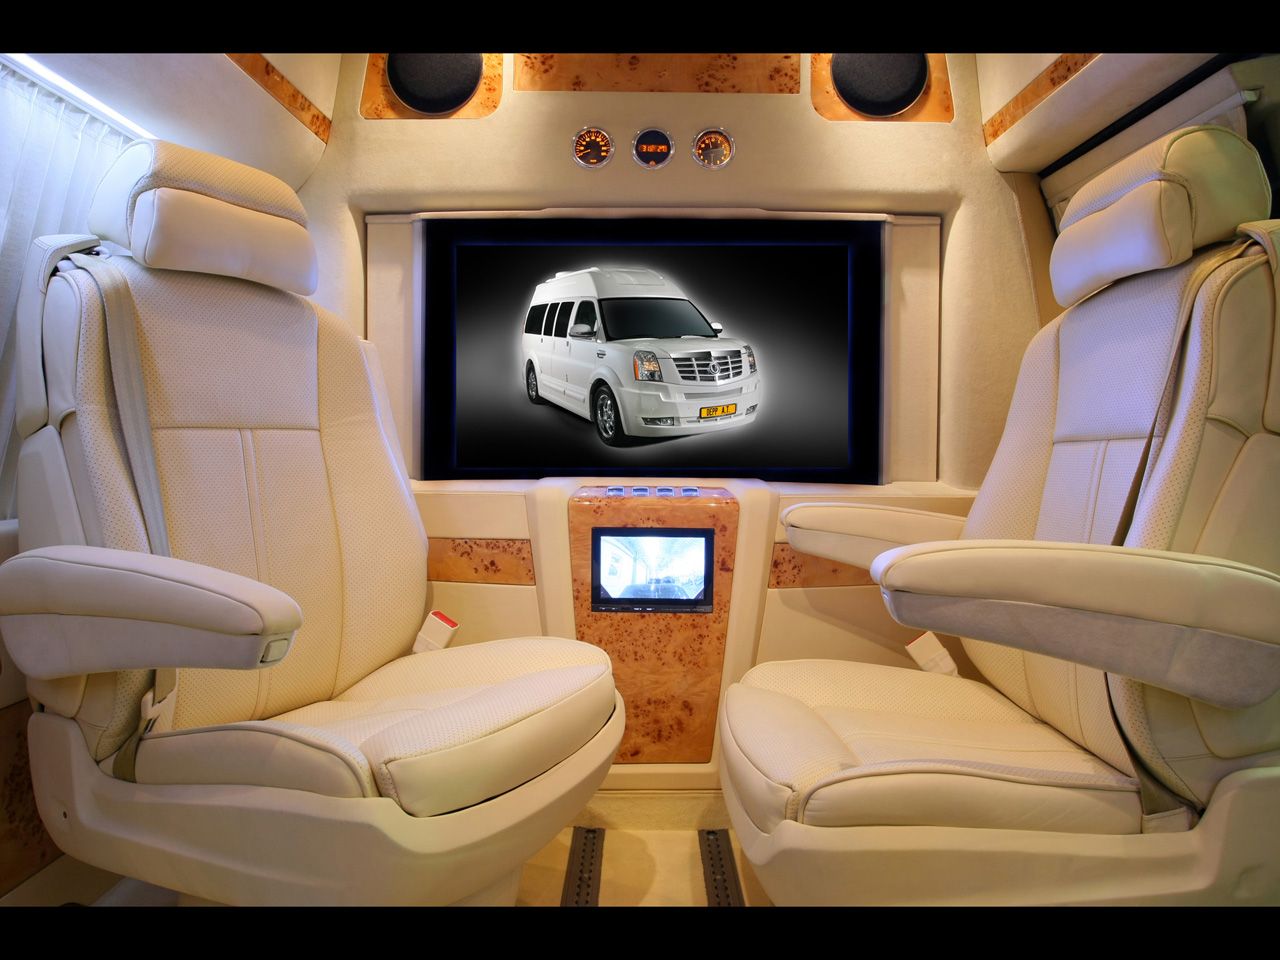 Chevrolet Express Interior With Monitor Wallpaper 1280x960